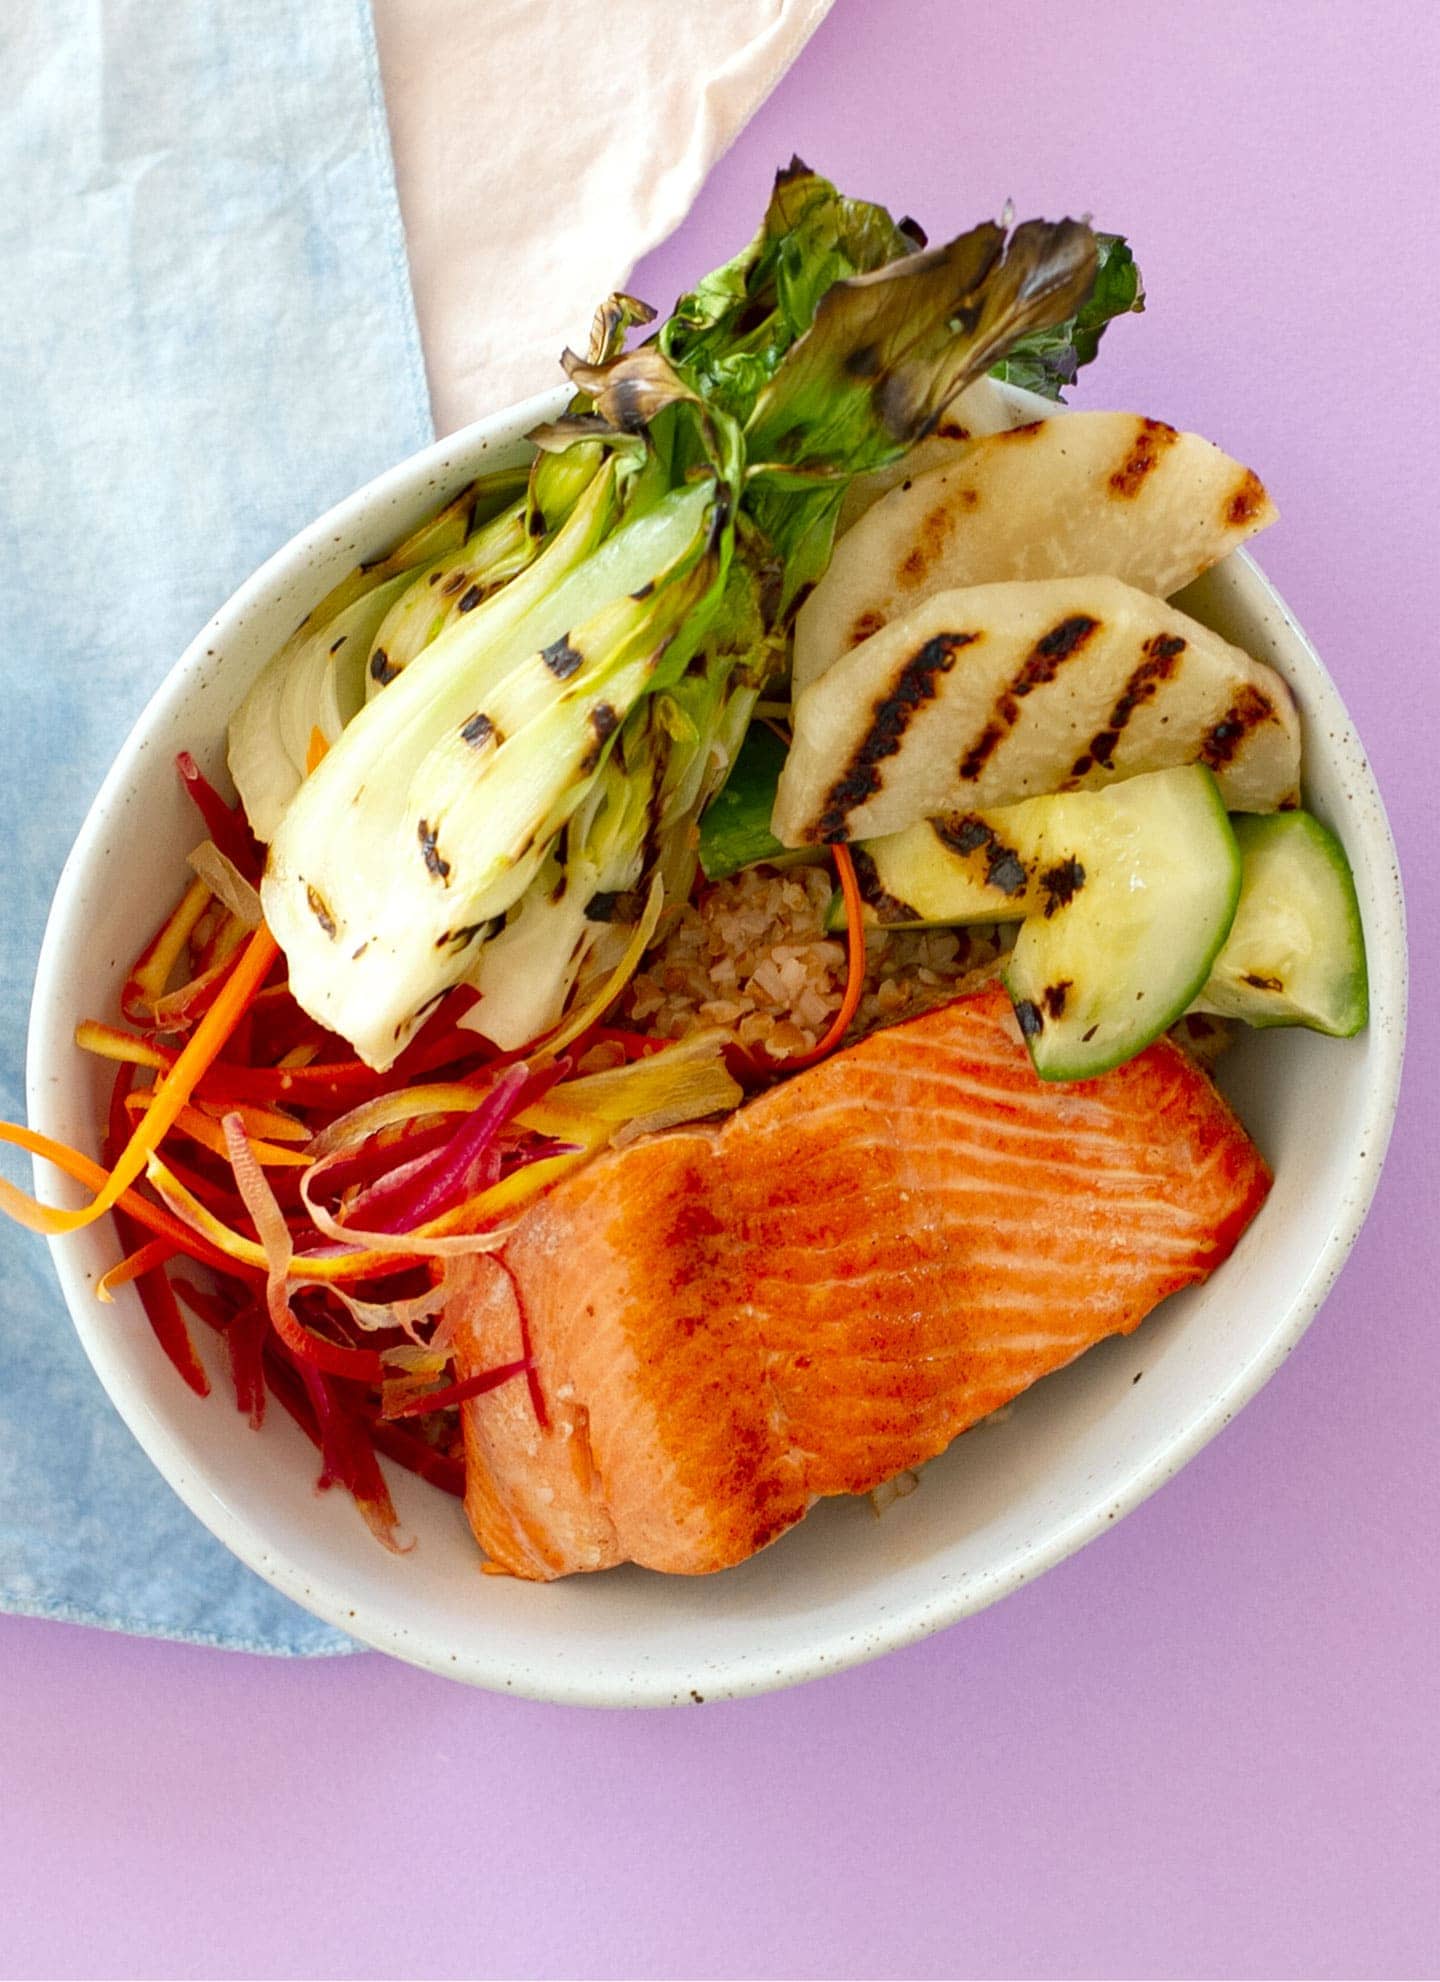 Top-down view of a grain bowl with pan-seared salmon, carrot strips, grilled baby bok choy, kohlrabi, and cucumber over a bed of bulgur in a white bowl sitting on a pastel purple surface.